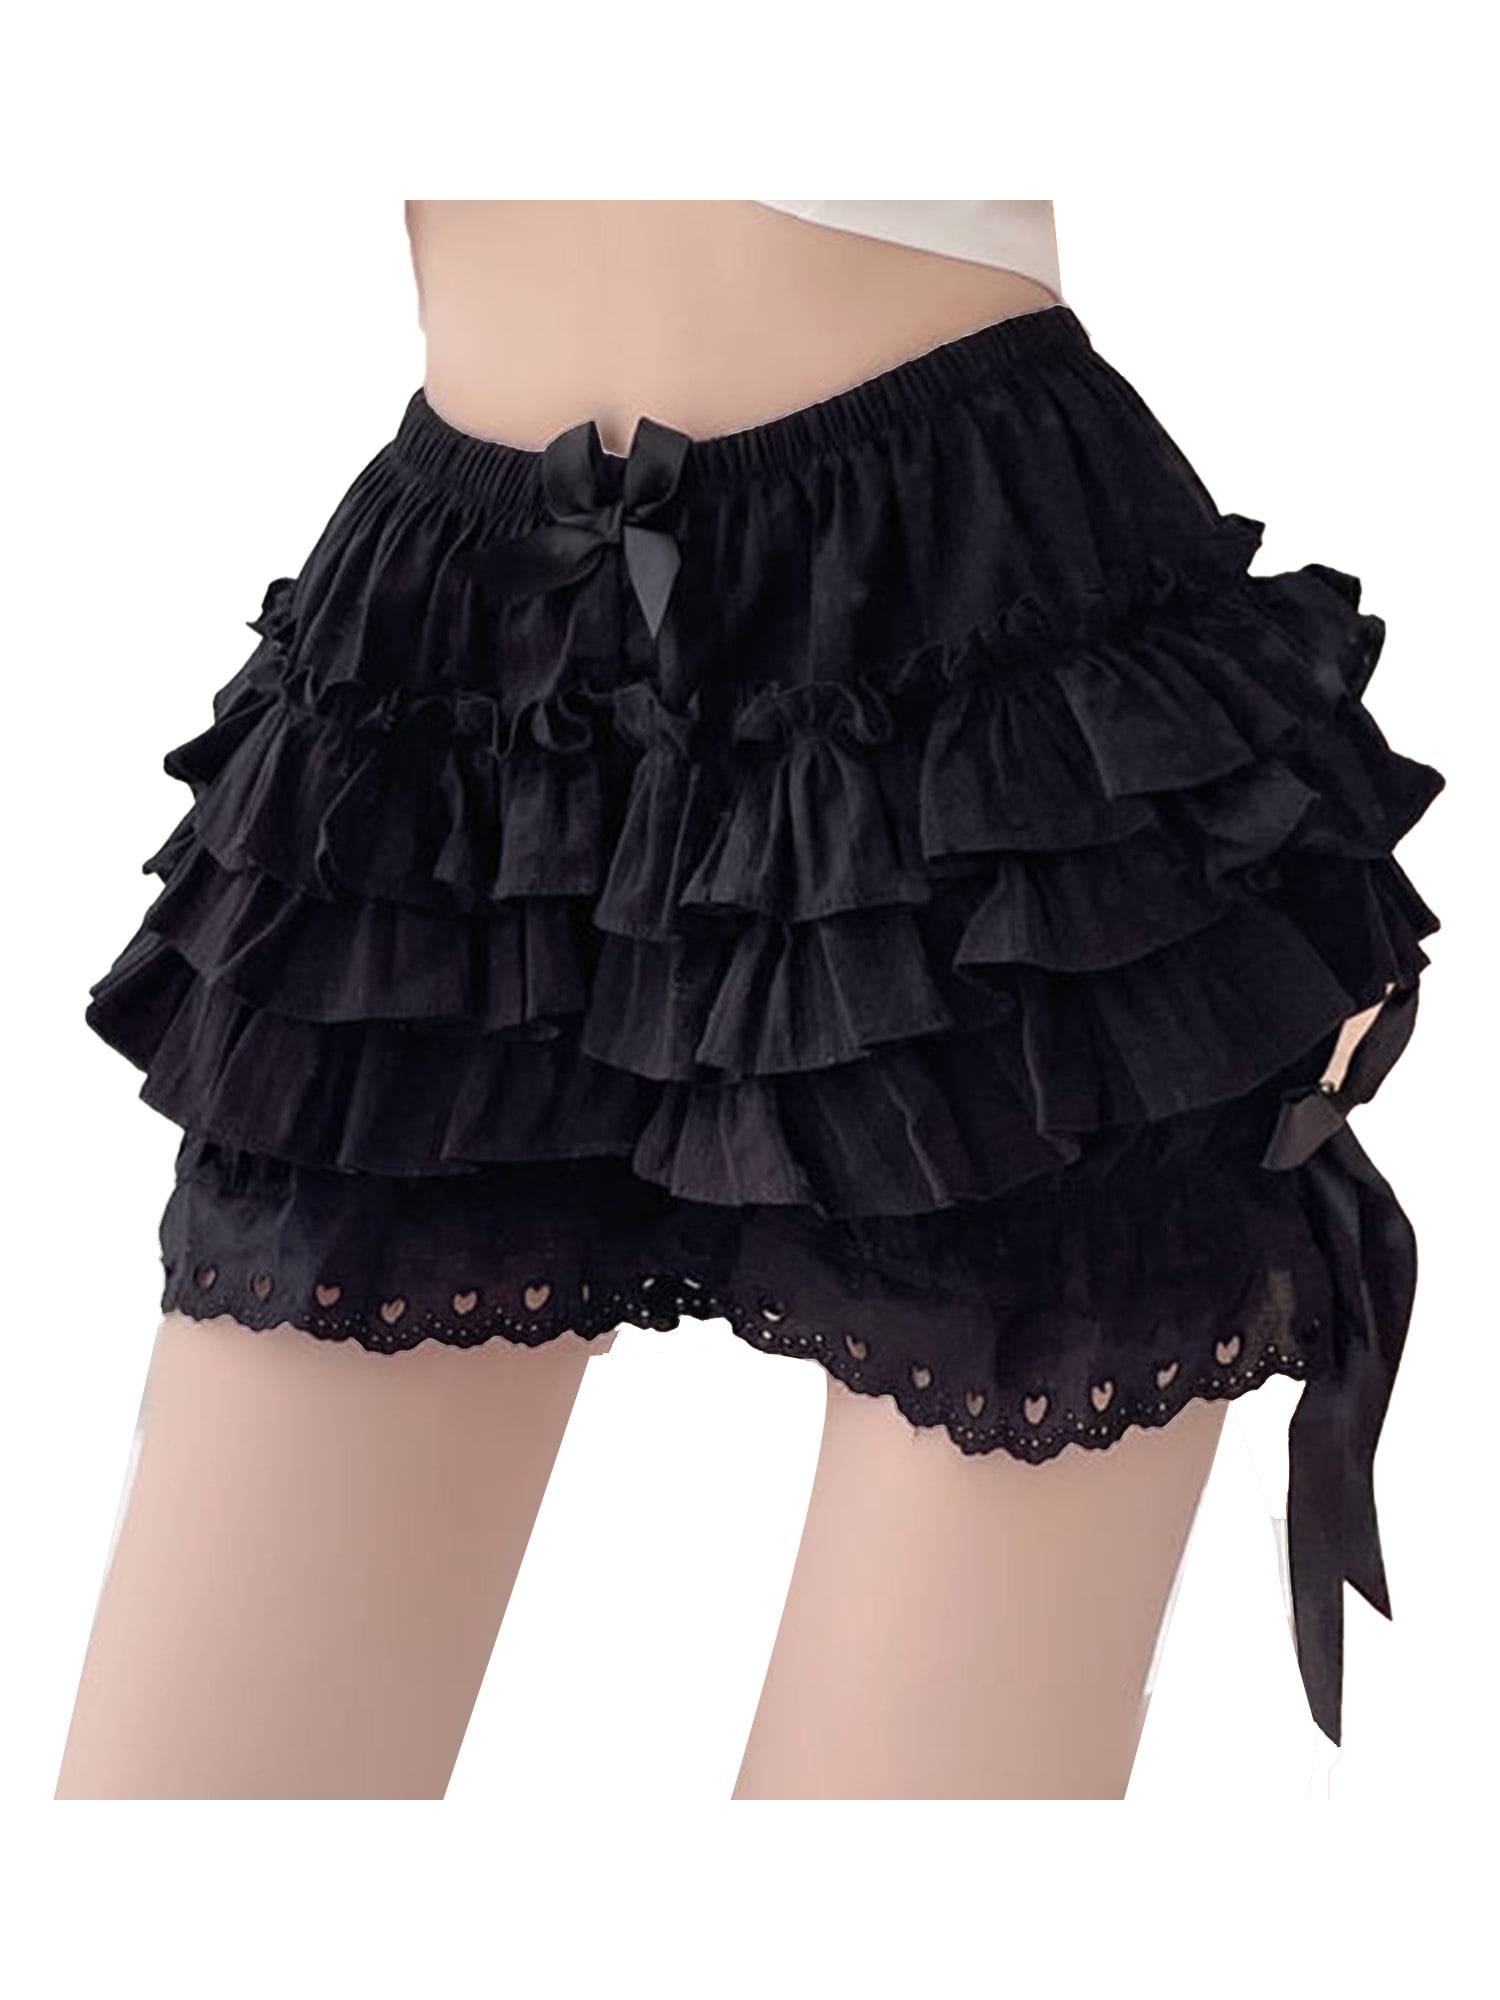 CHICTRY Women's Ruffled Pettipants Bloomers Lace Trim Knickers Panties  Lingerie Black One Size : Clothing, Shoes & Jewelry 